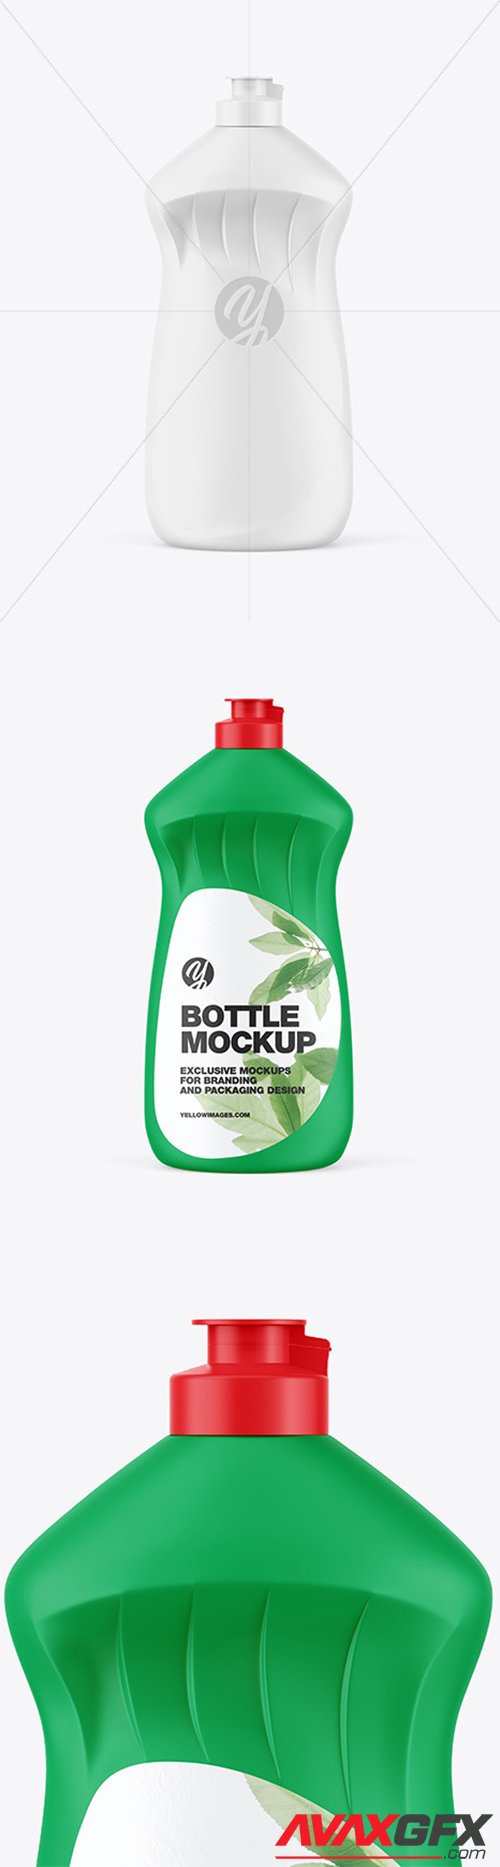 Washing Up Liquid Glossy Bottle W Closed Cap Mockup 62001 Avaxgfx All Downloads That You Need In One Place Graphic From Nitroflare Rapidgator